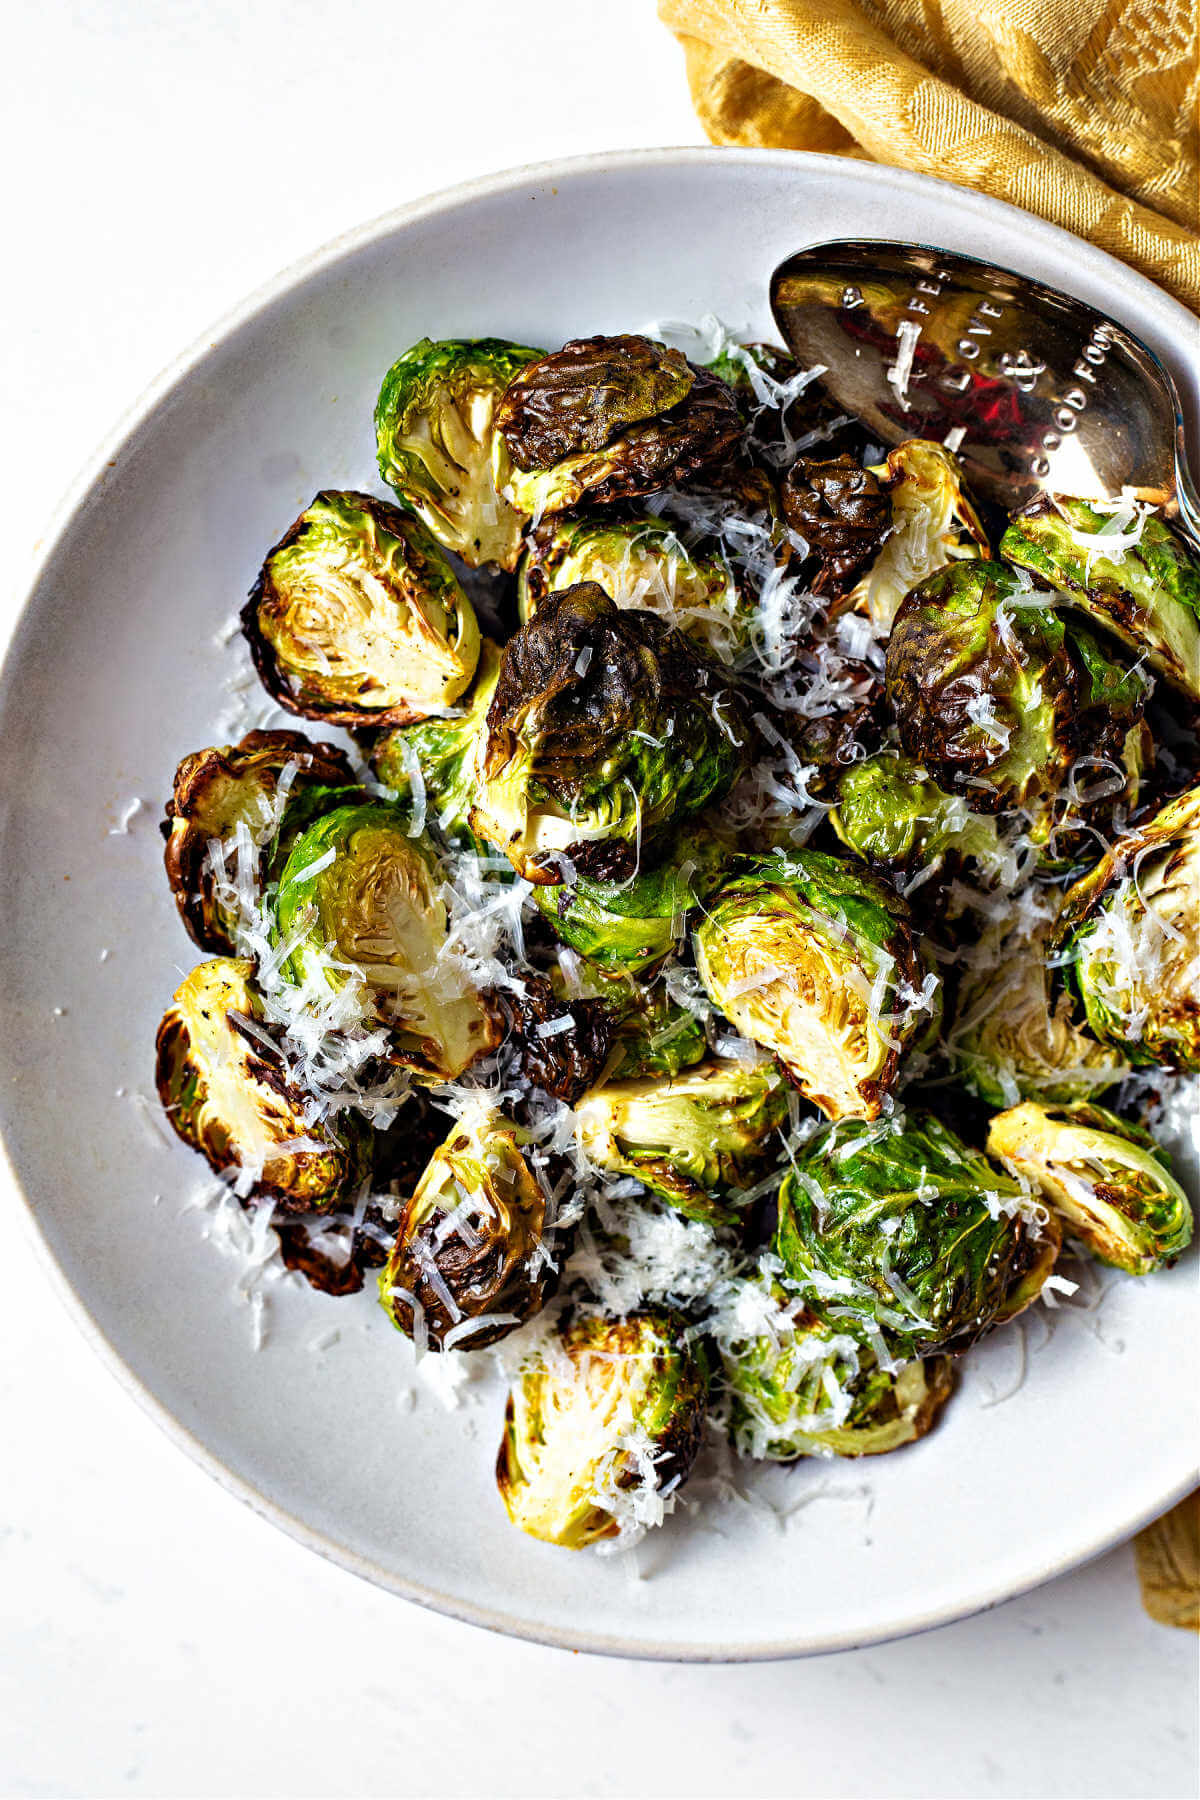 crispy air fryer brussels sprouts in a white bowl with freshly grated parmesan cheese sprinkled on top.